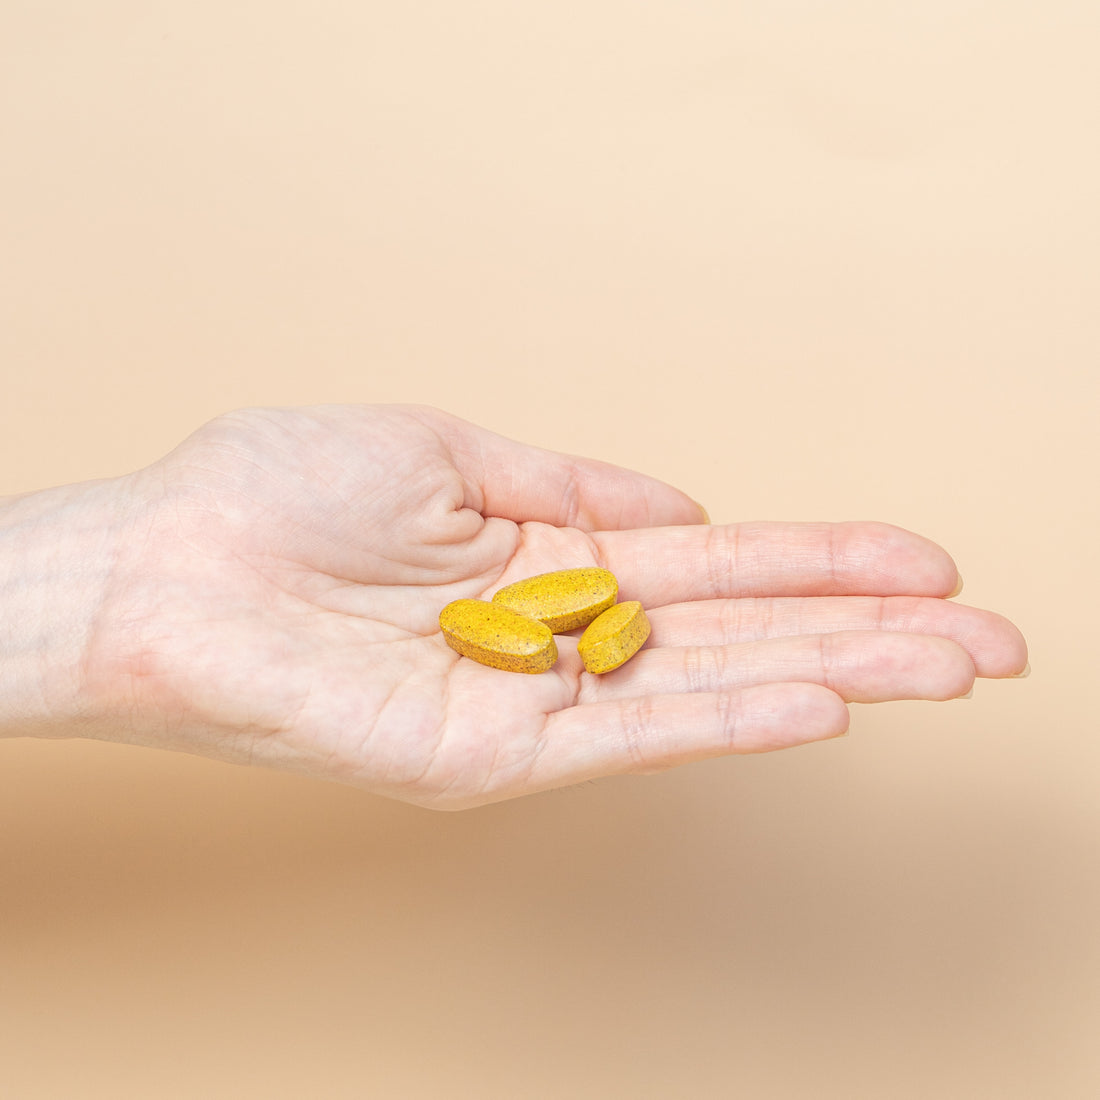 Inner Glow Vitamins Hair, Skin, and Nails Pills Take three tablets once a day for at least 12 weeks to see results.